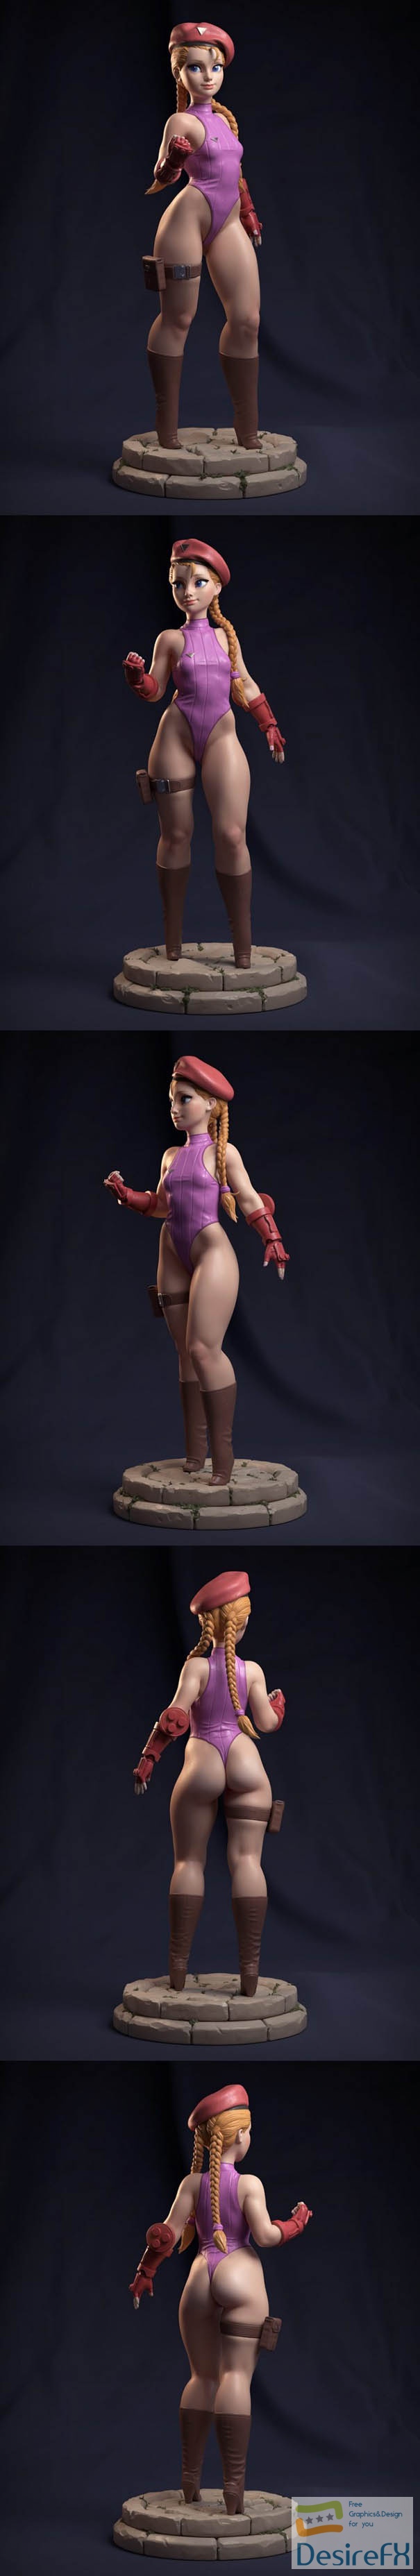 Cammy White from Street Fighter – 3D Print